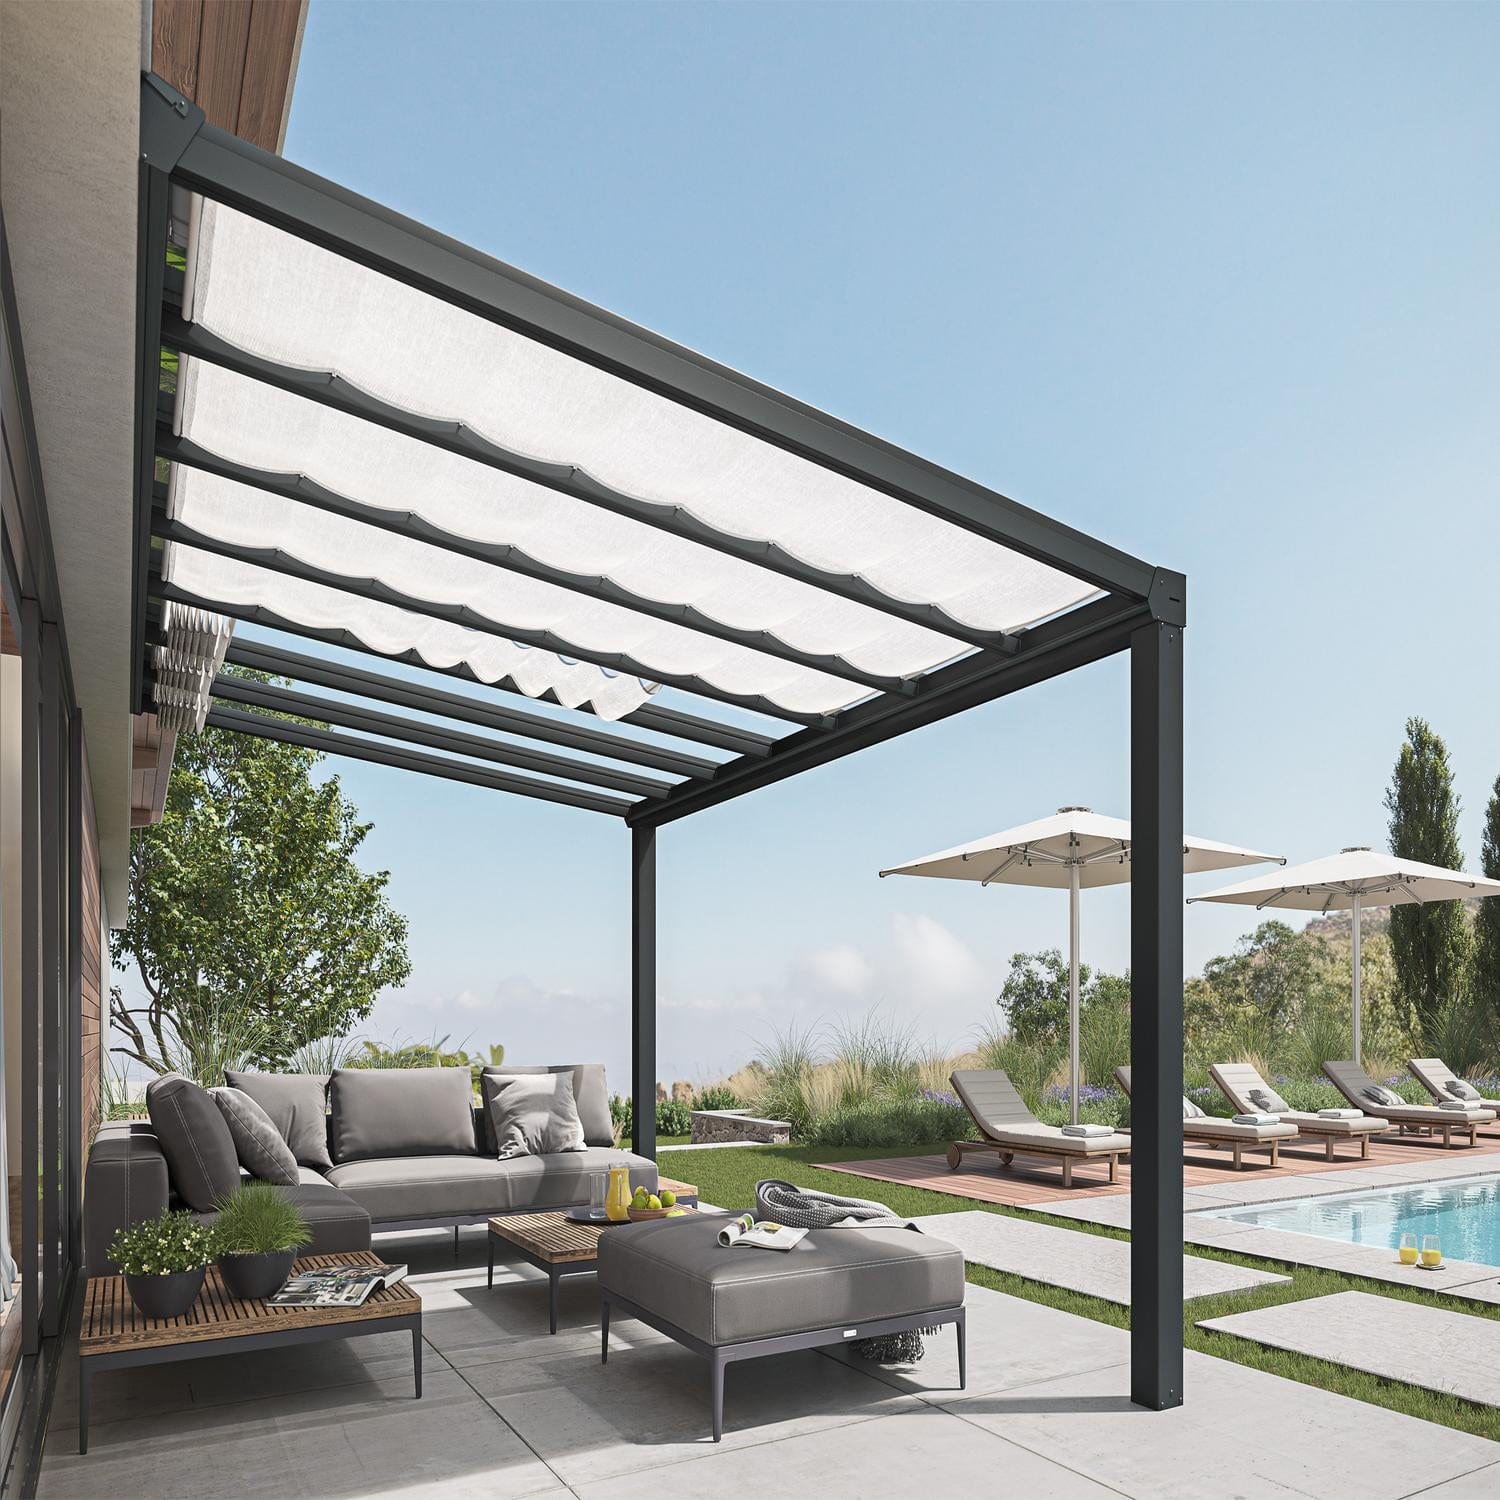 Palram - Canopia Patio Cover Accessories Palram - Canopia | Stockholm Patio Cover Roof Blinds 11x31 ft HG2004